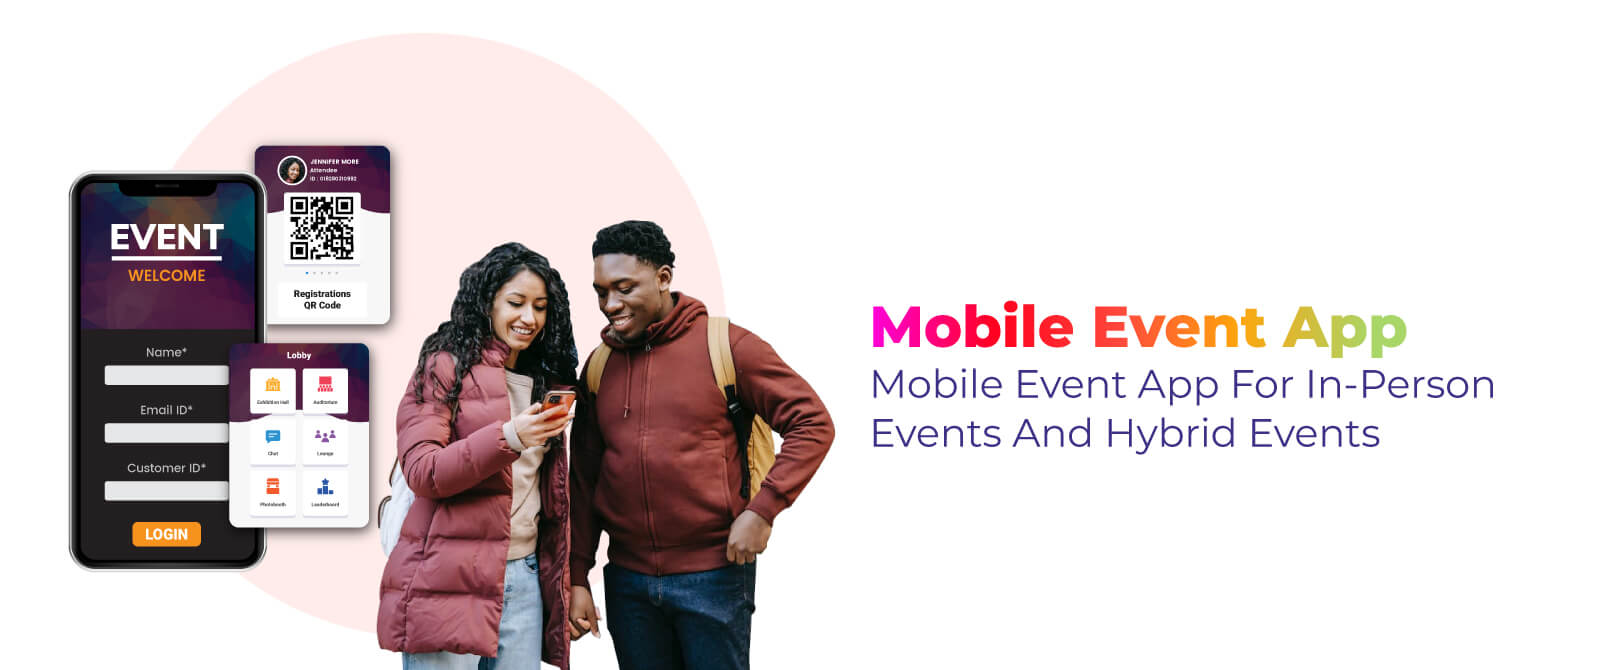 Mobile Event App for In-Person Events and Hybrid Events